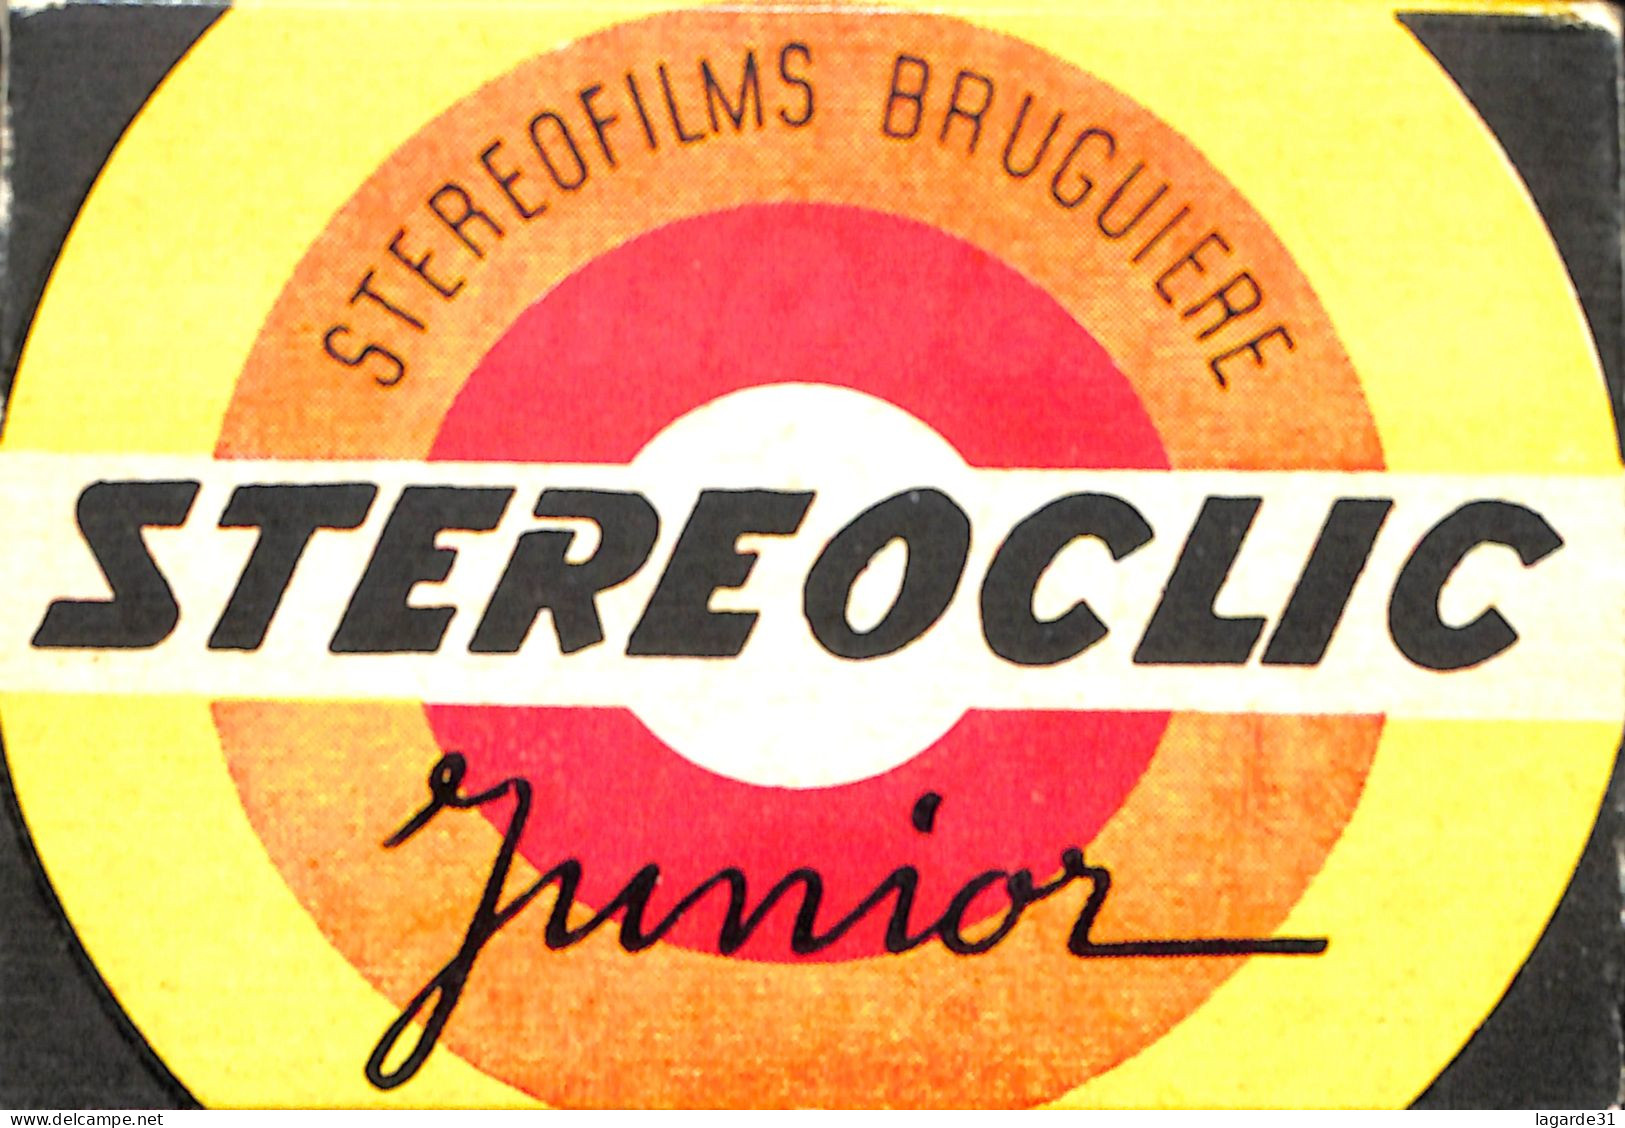 Stereoscope "stereoclic" Et Stereocartes Brugiere - Stereoskope - Stereobetrachter